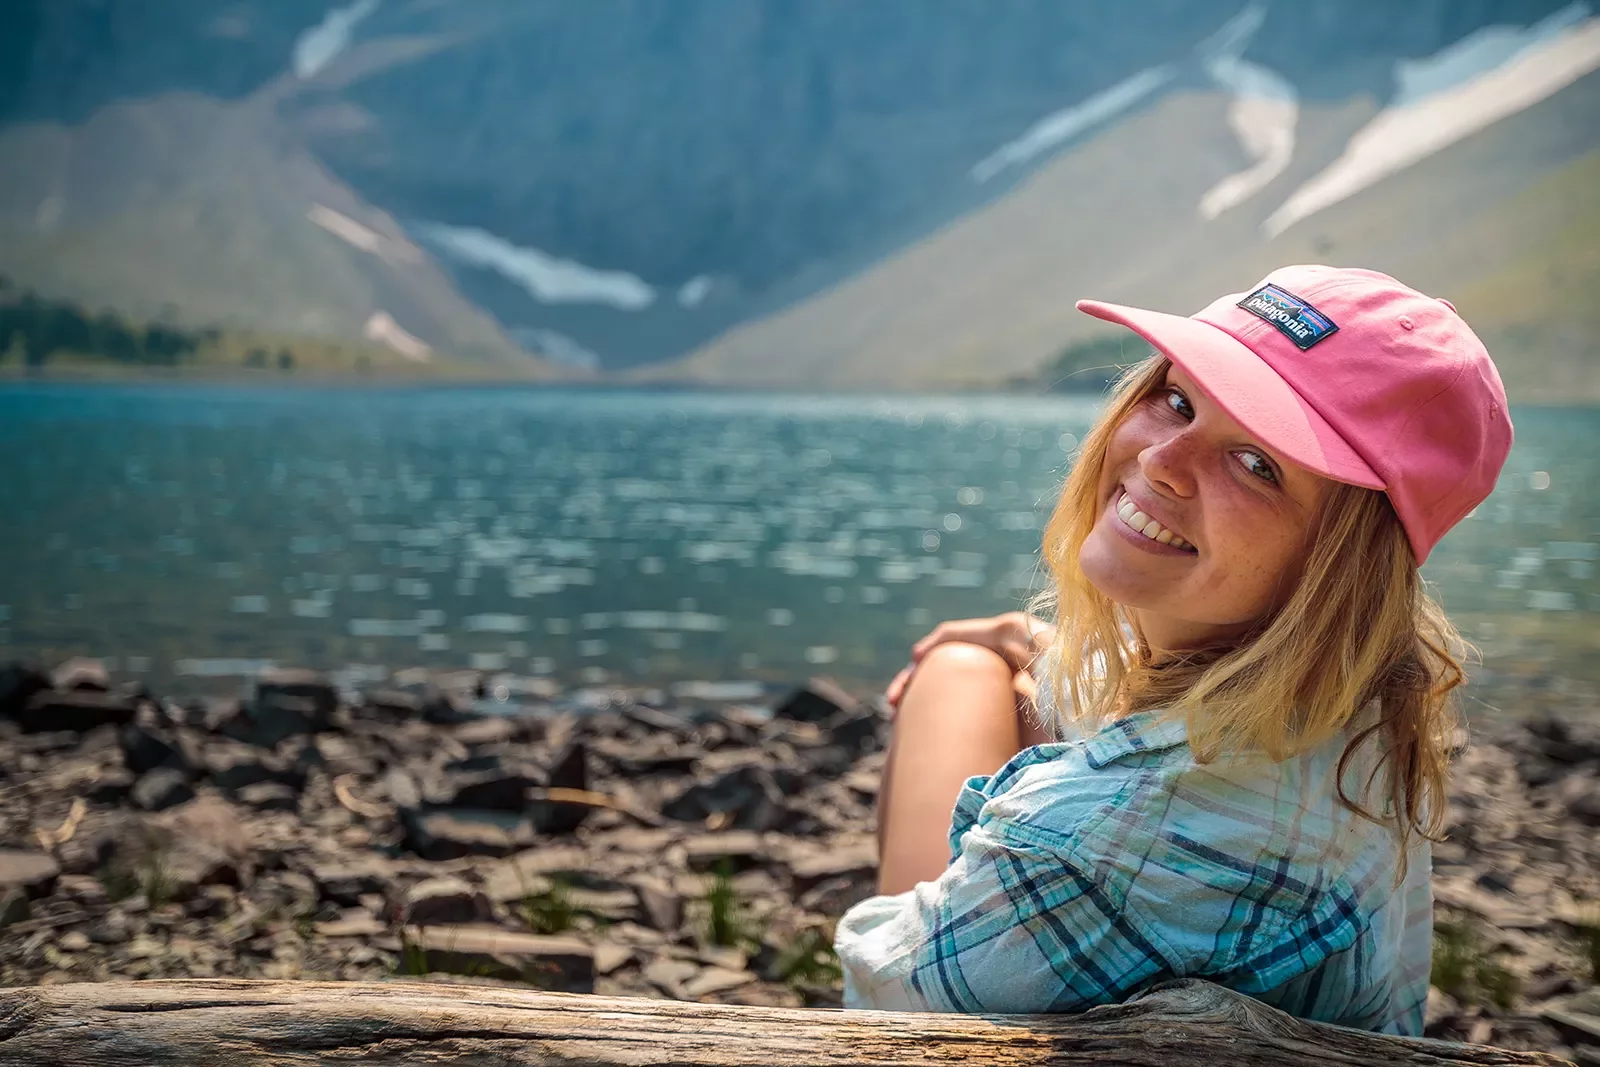 Backroads guest smiling in front of lake and mountains